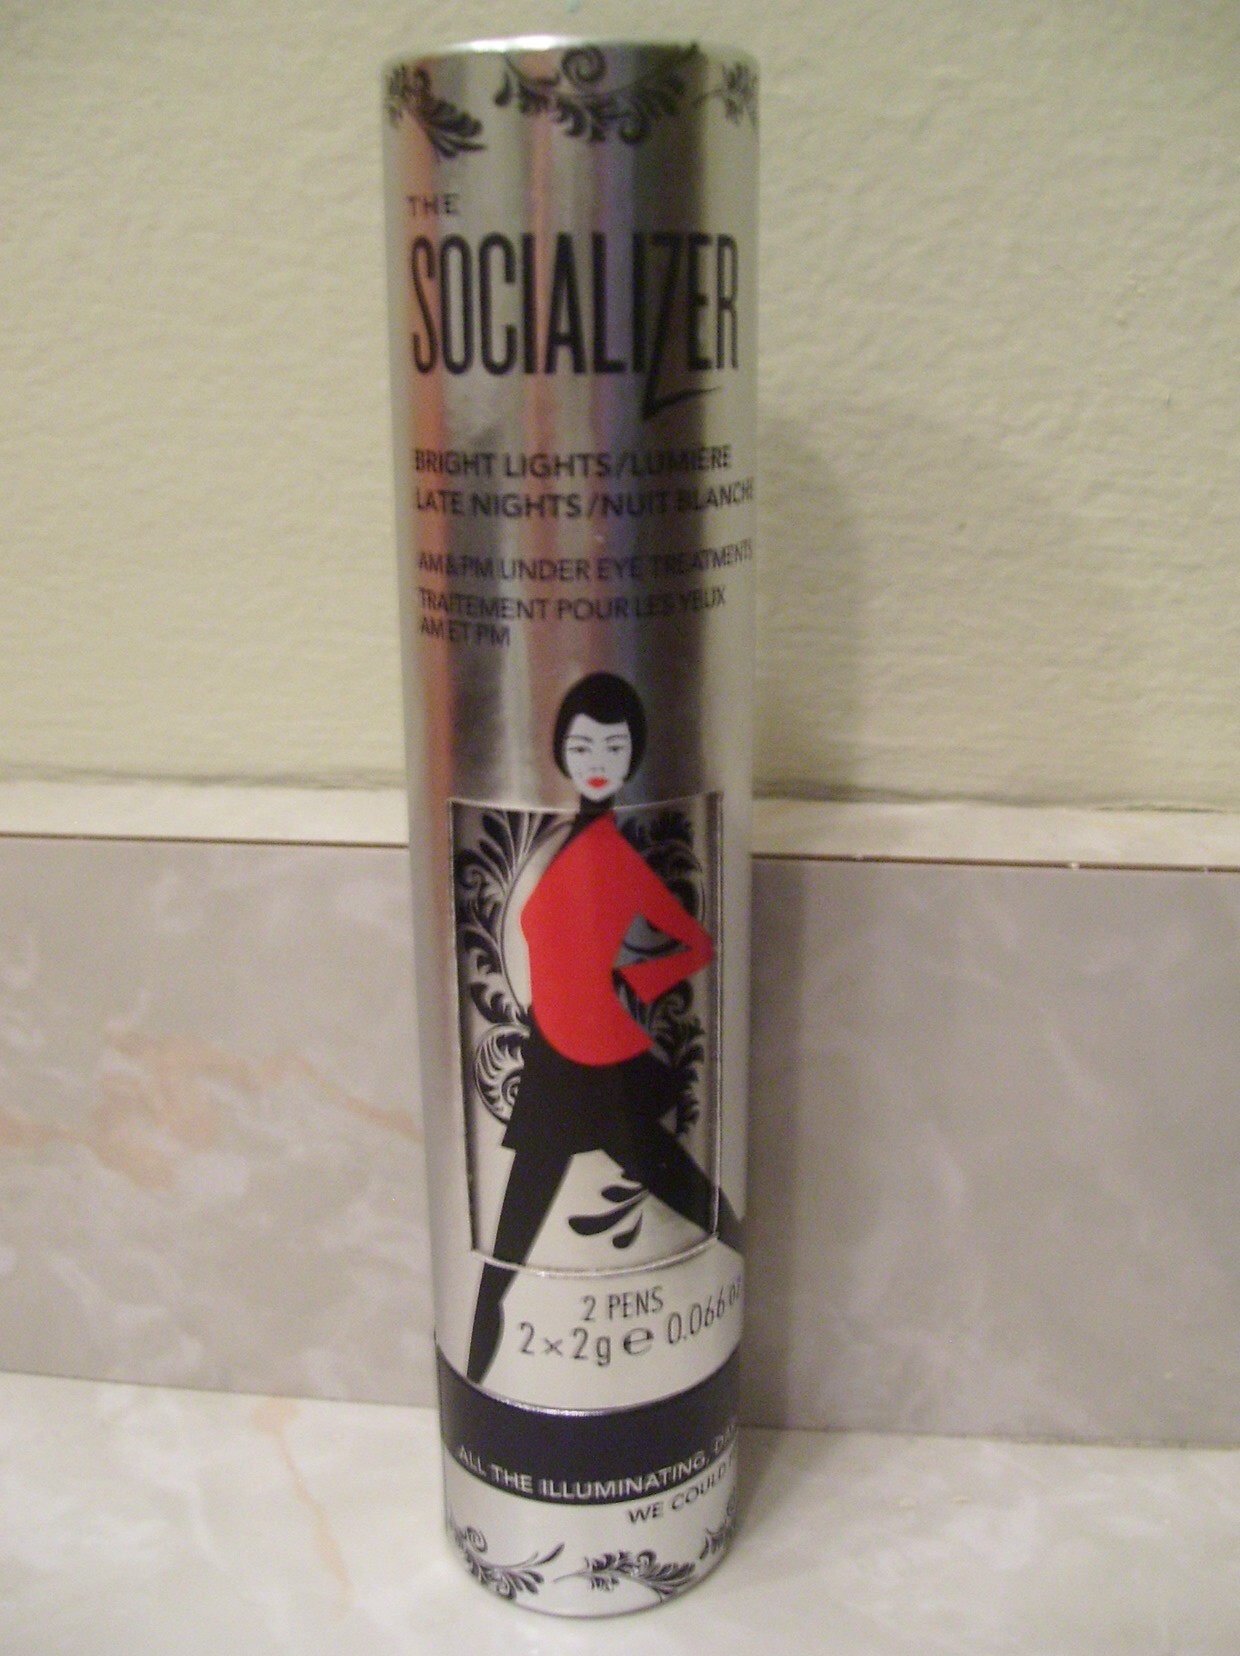 Review:  The Socializer by Elizabeth Grant